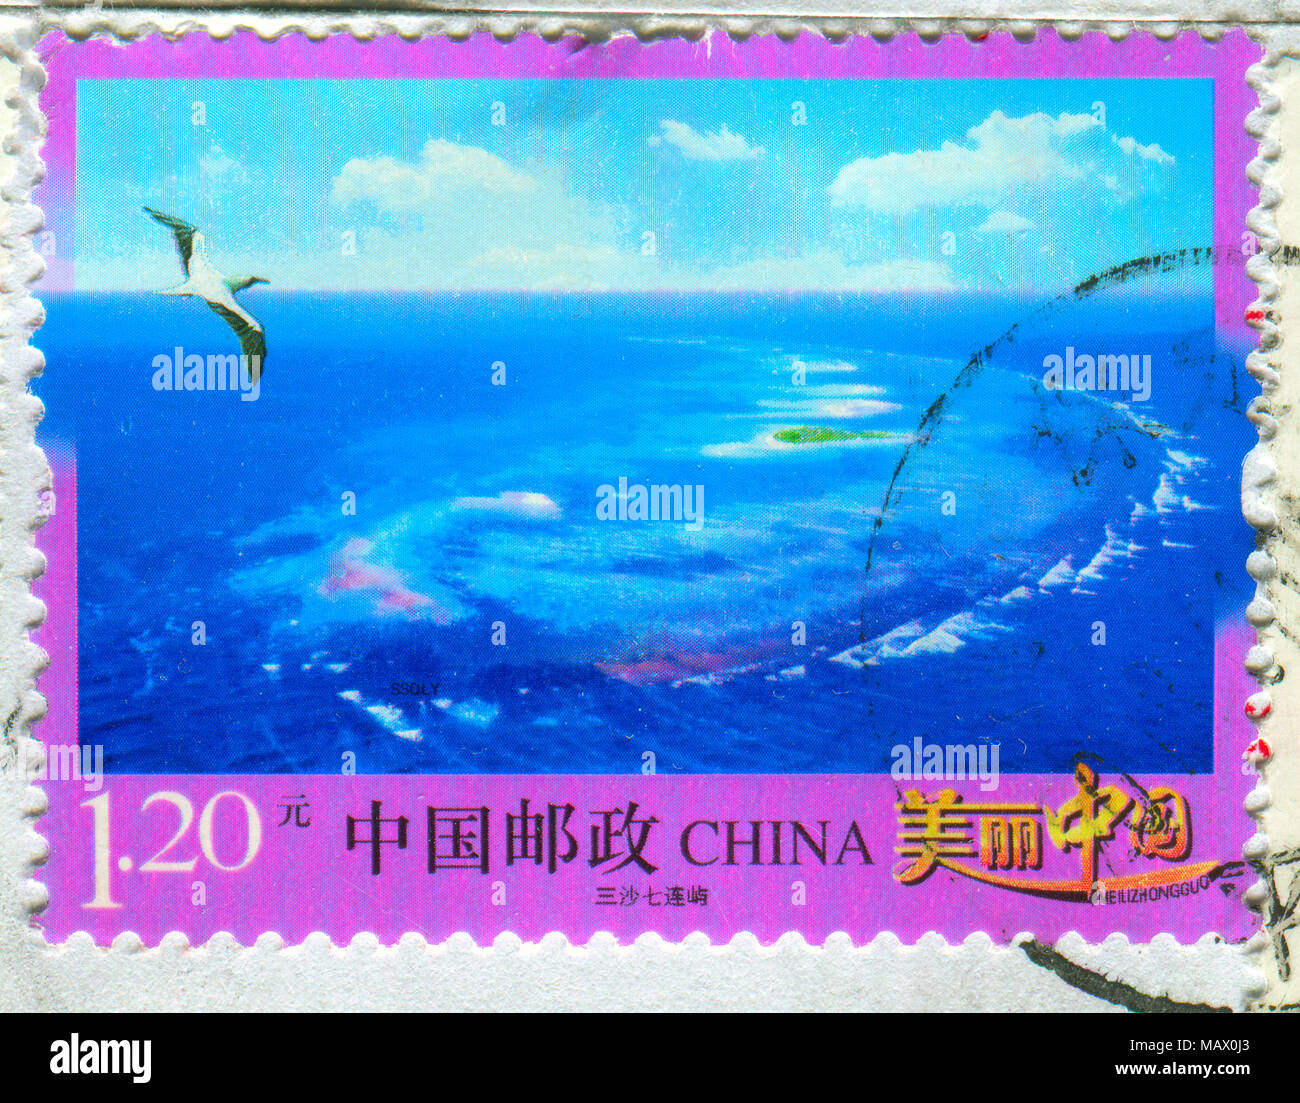 GOMEL, BELARUS, 27 OCTOBER 2017, Stamp printed in China shows image of the Sea, circa 2017. Stock Photo